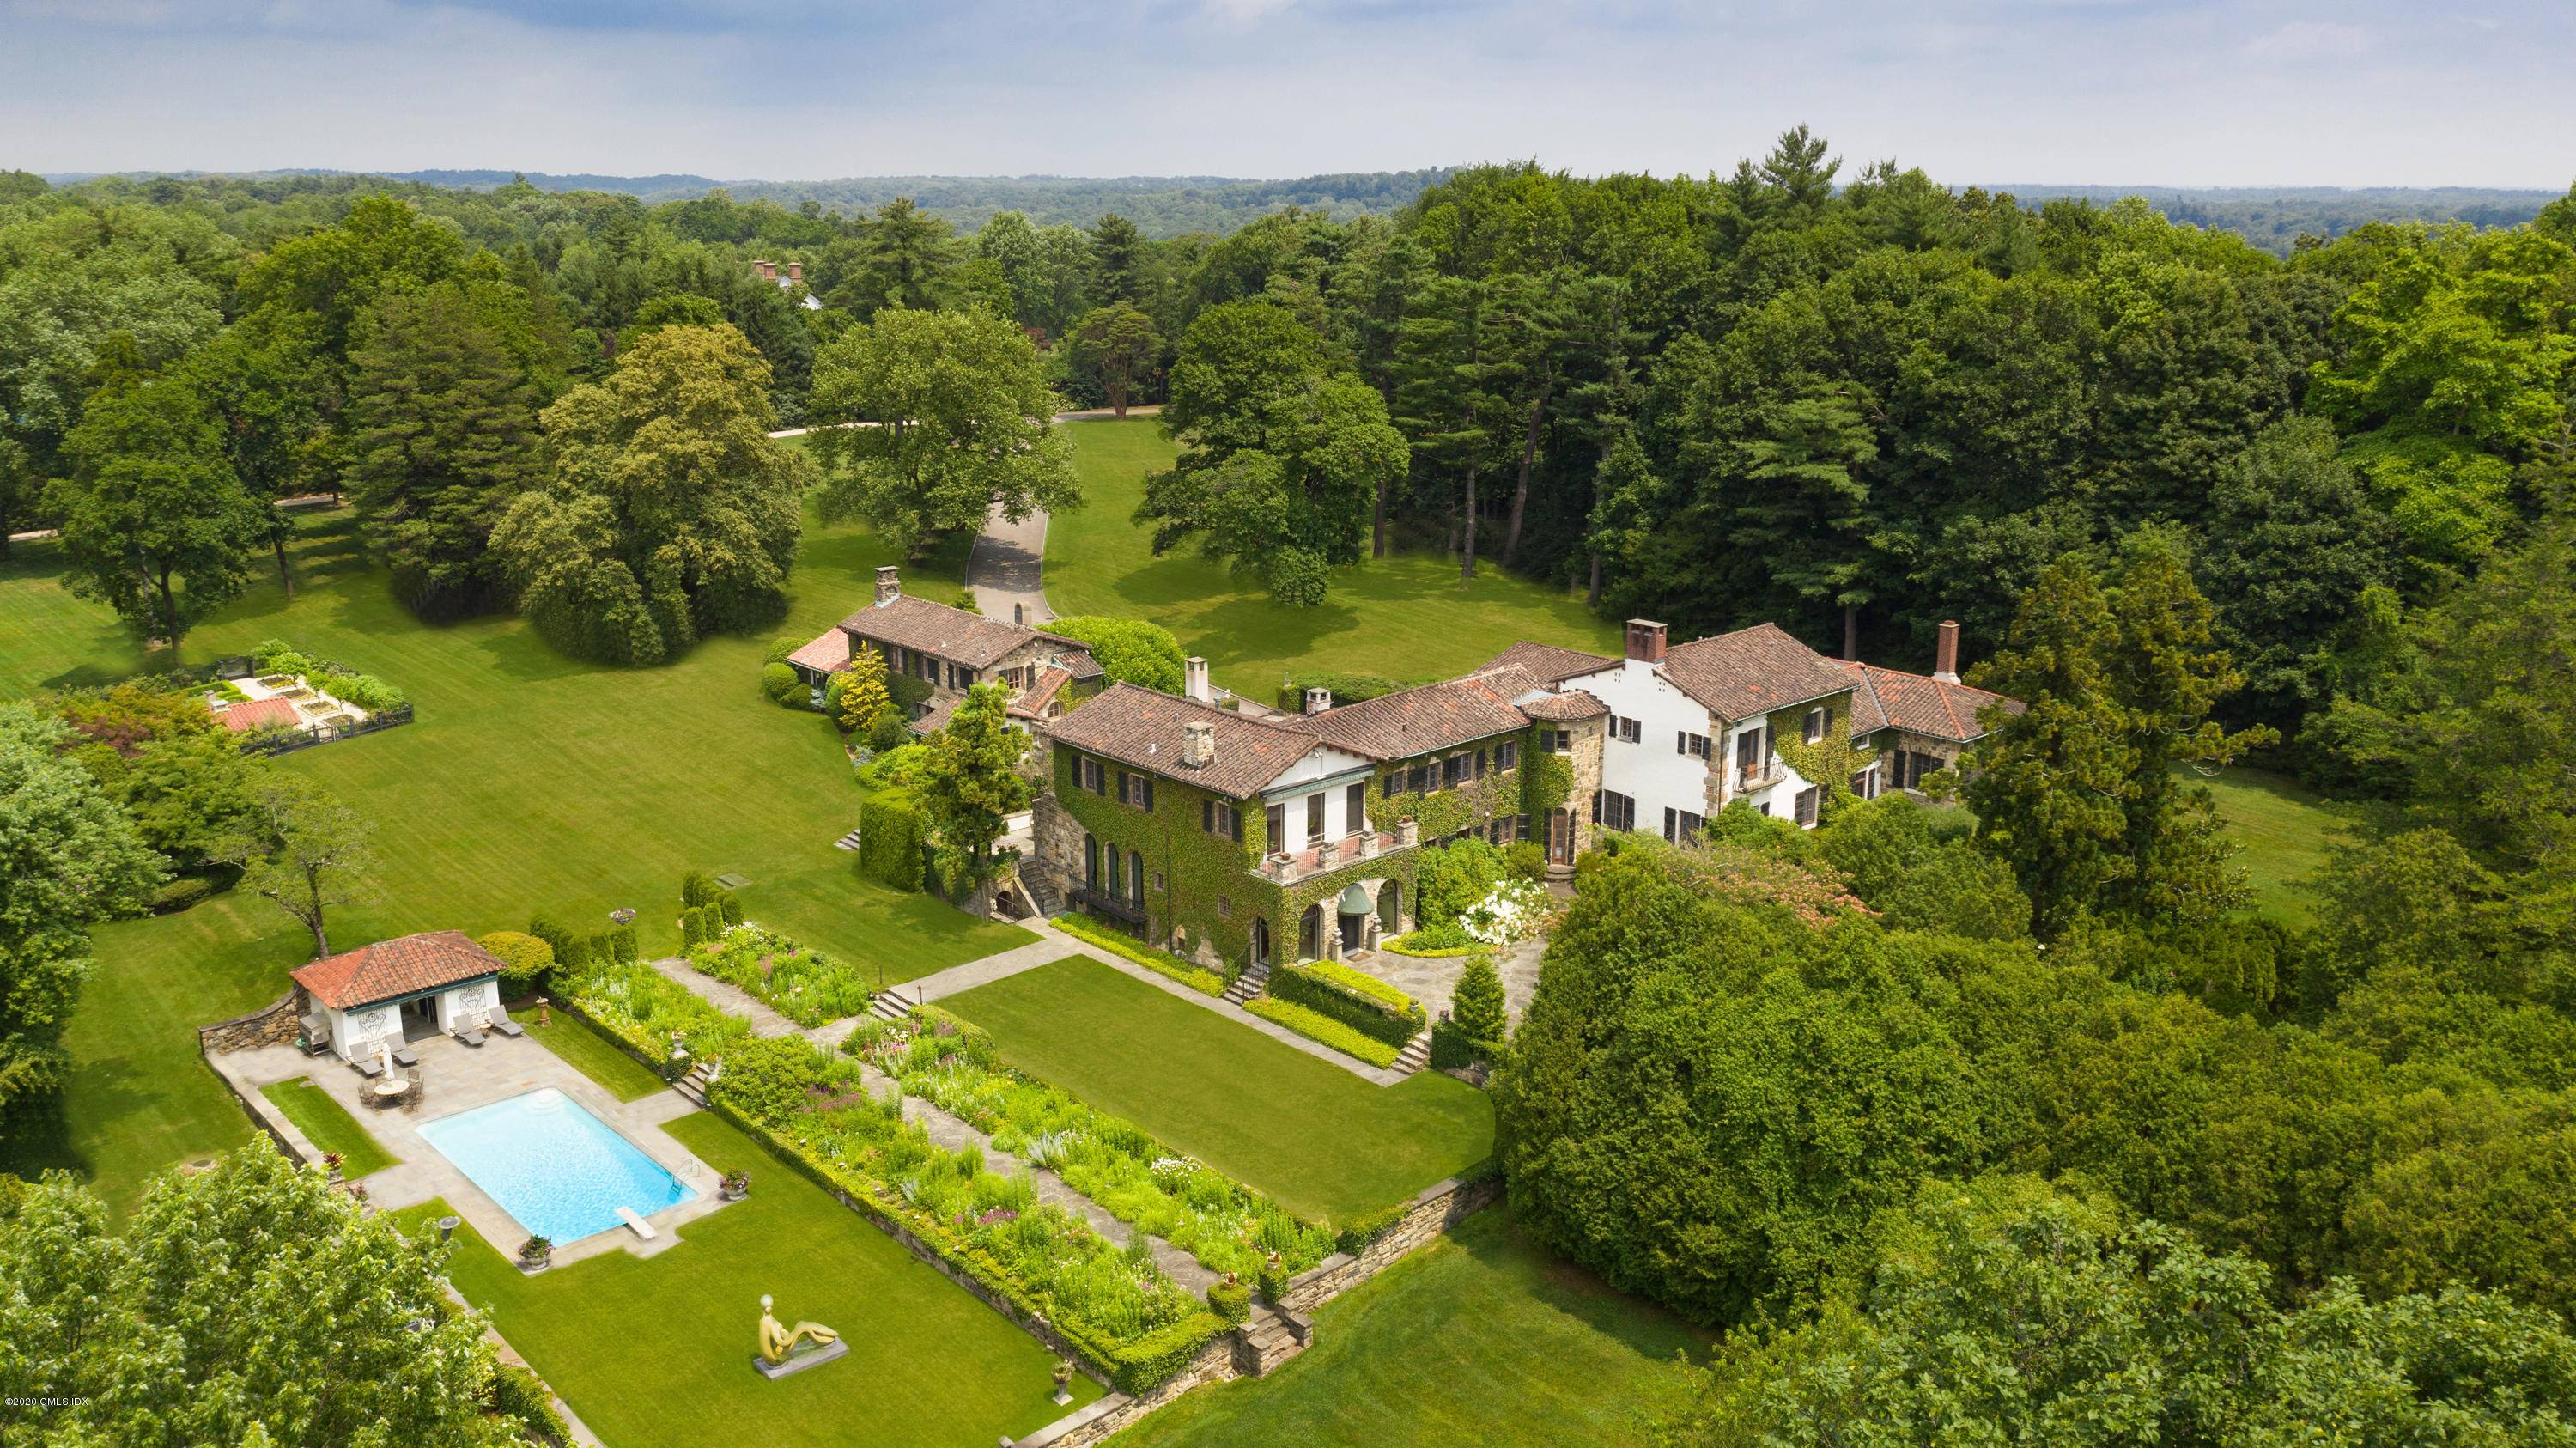 Sunridge Farm, one of Greenwich's last remaining Great Estates, offers a rare combination of spectacular park like land and a home of architectural mastery.